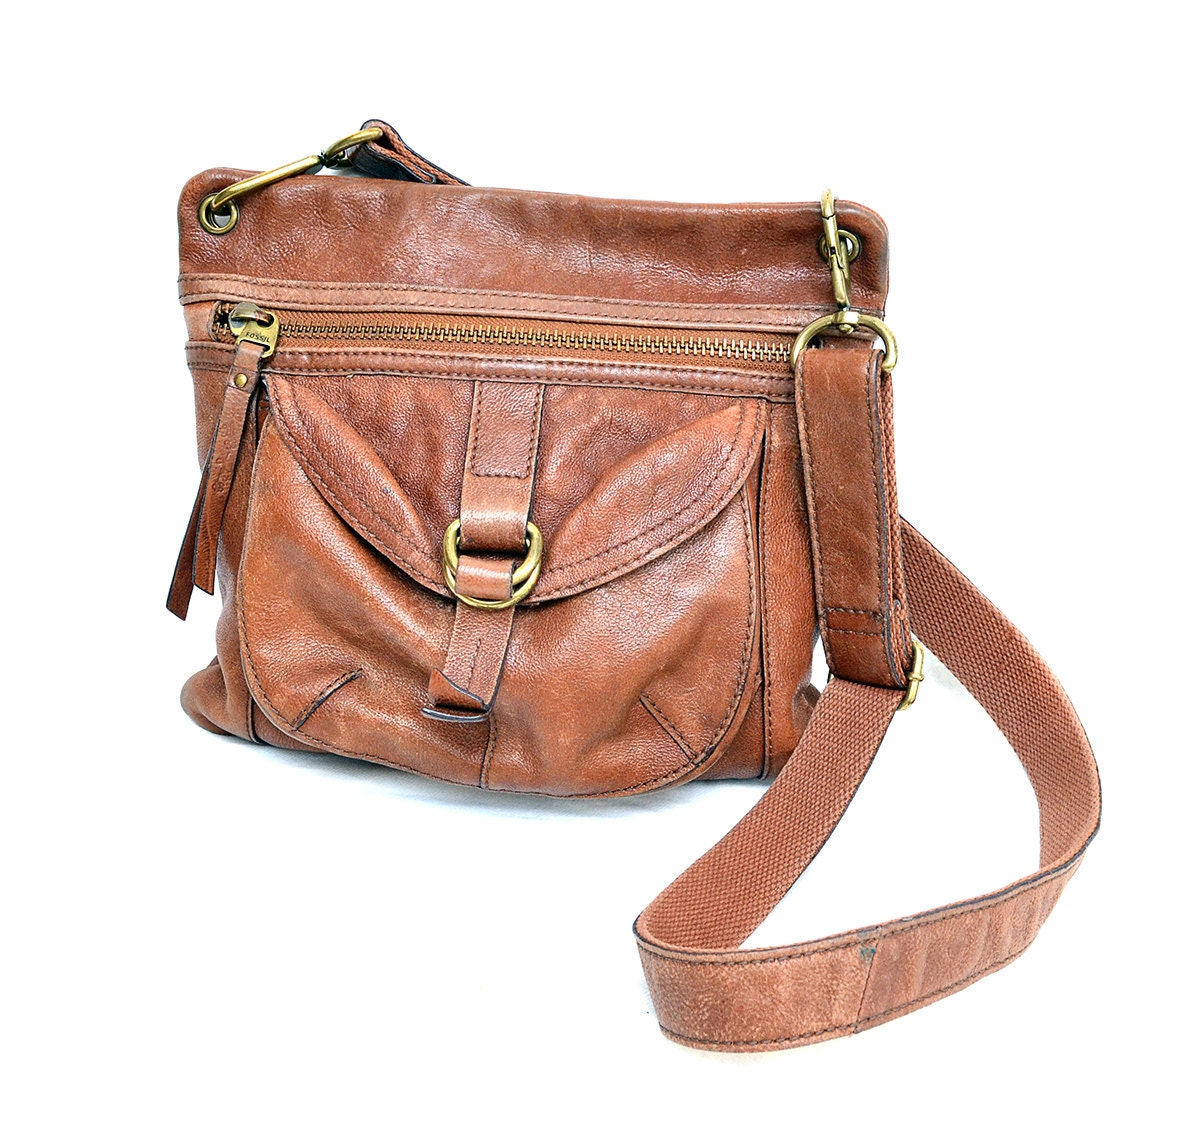 Fossil Long Live Vintage Leather Cross-body Bag Purse